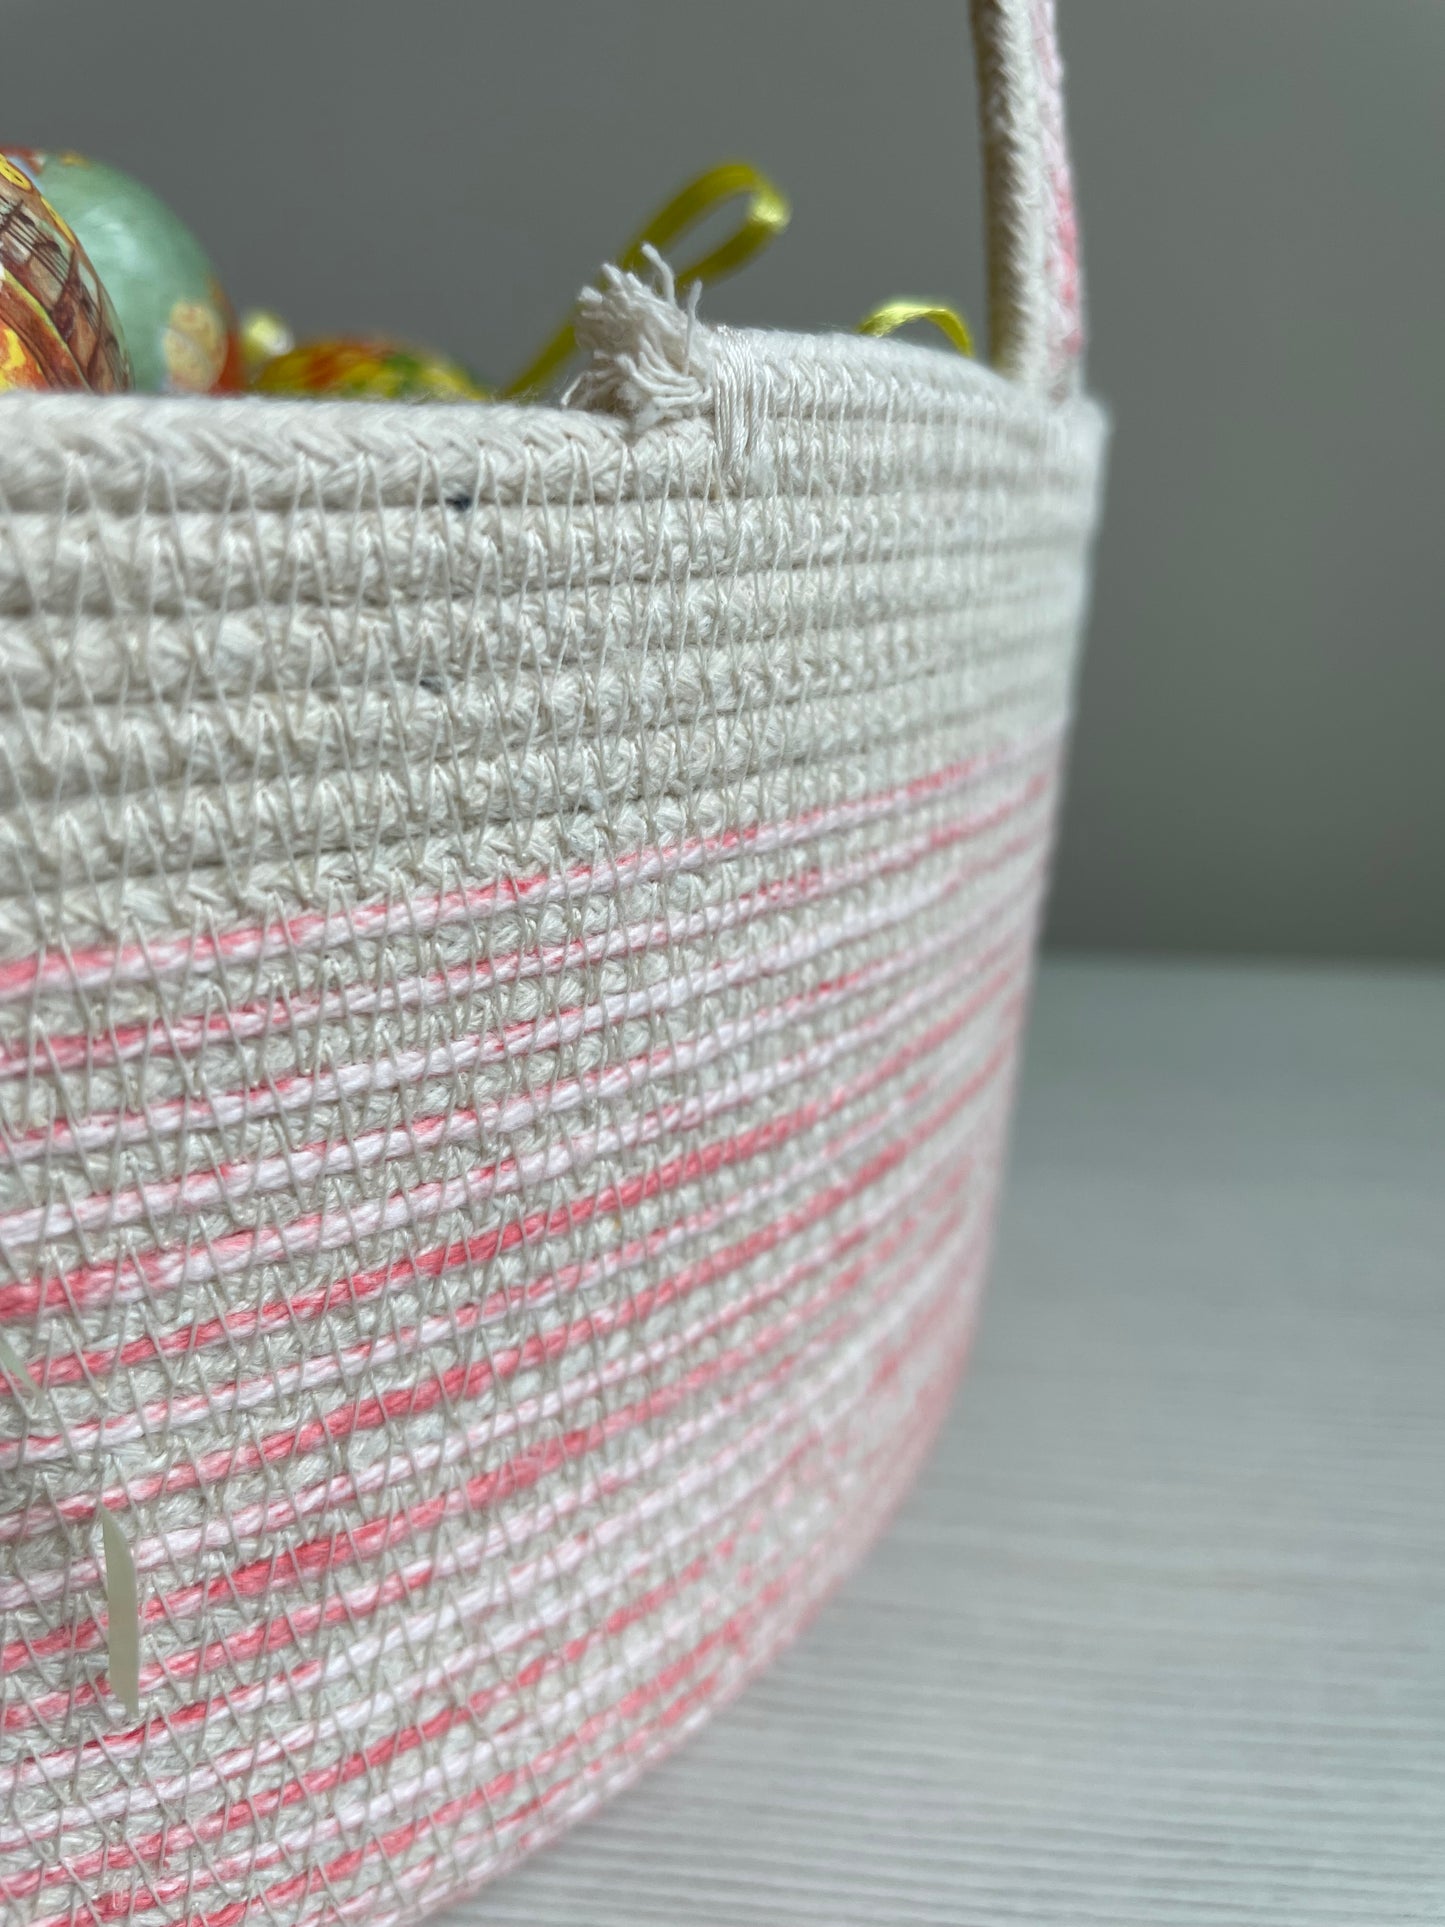 Large Coiled Cotton Rope Easter Basket